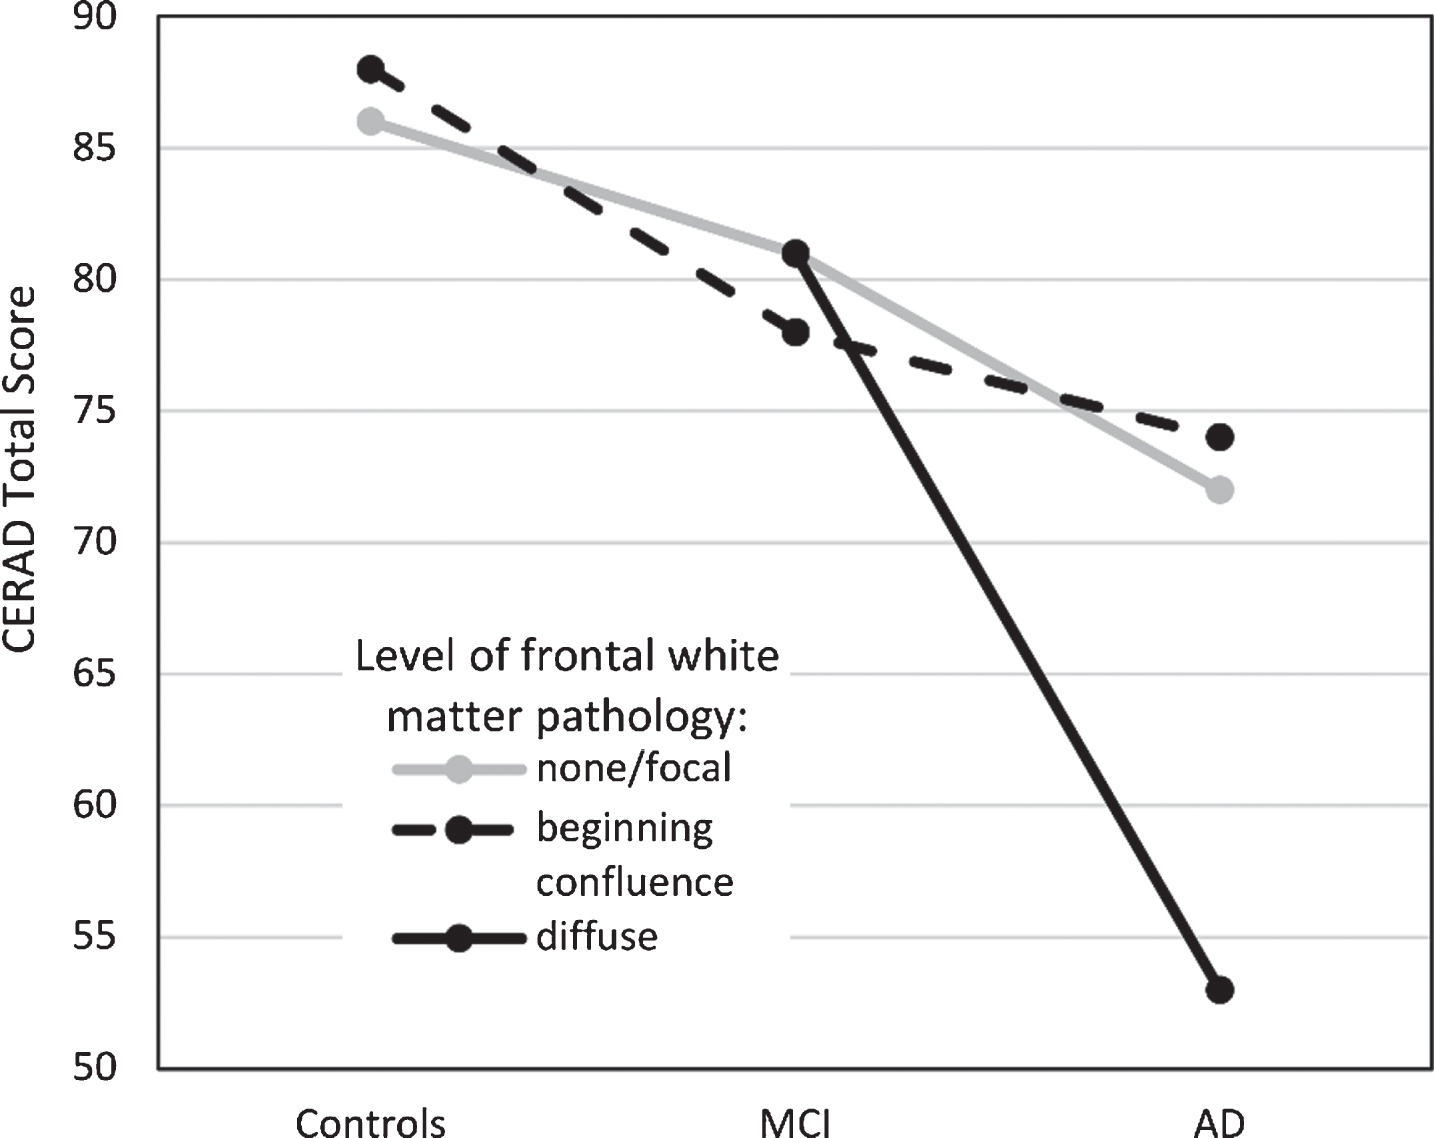 Cognitive performance (as measured by the CERAD Total Score, range 0–115) in the three patient groups as a function of frontal white matter pathology. Estimated marginal means reported. MCI, mild cognitive impairment; AD, Alzheimer’s disease.